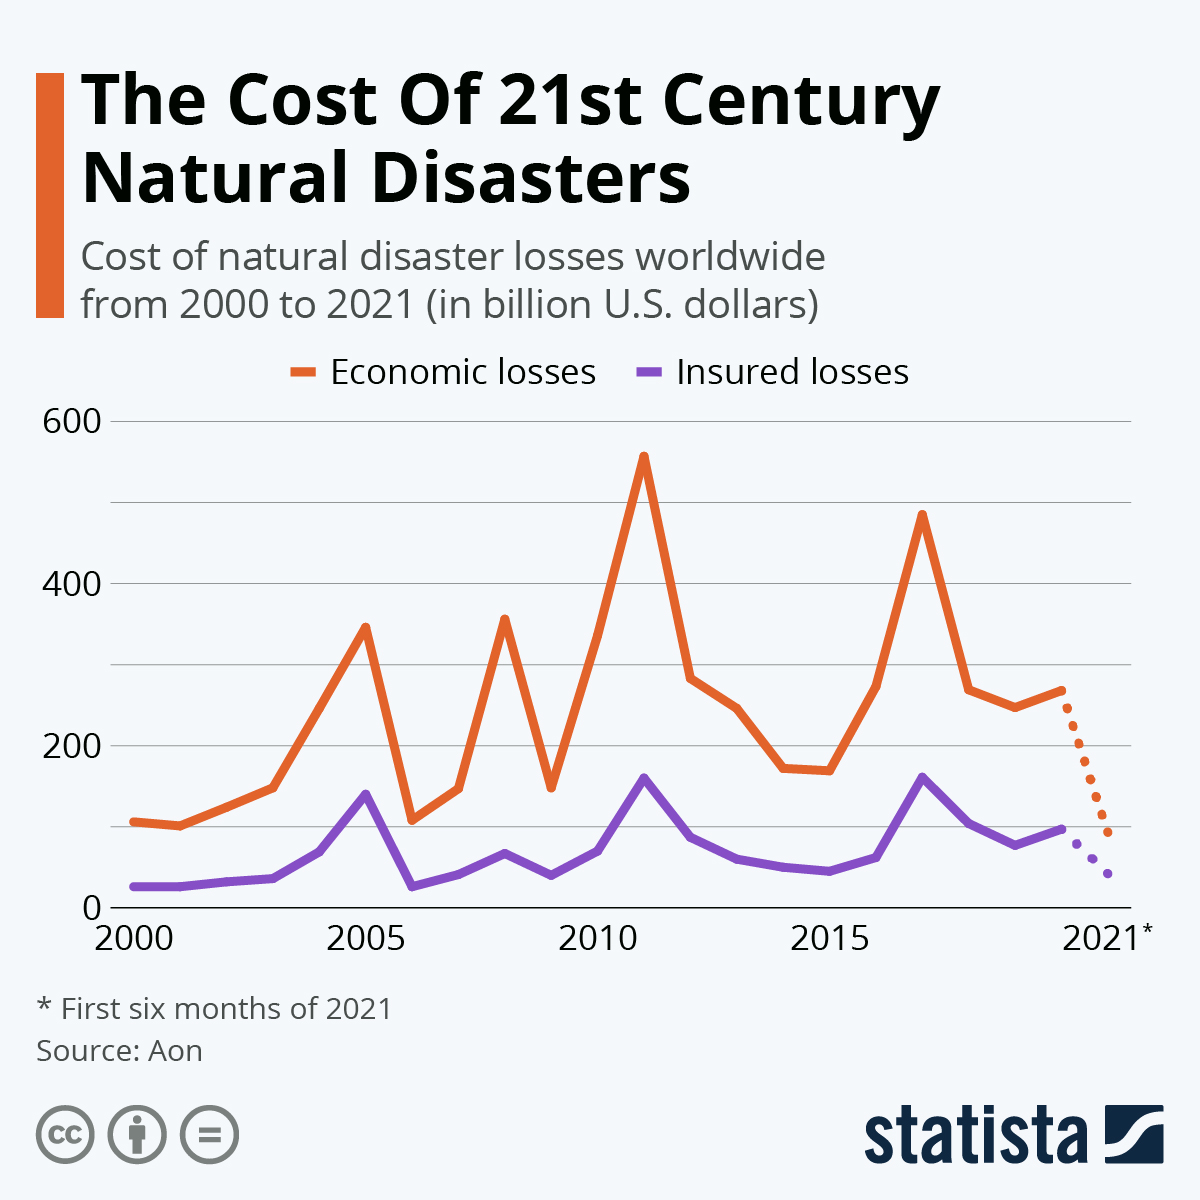 The Cost Of 21st Century Natural Disasters